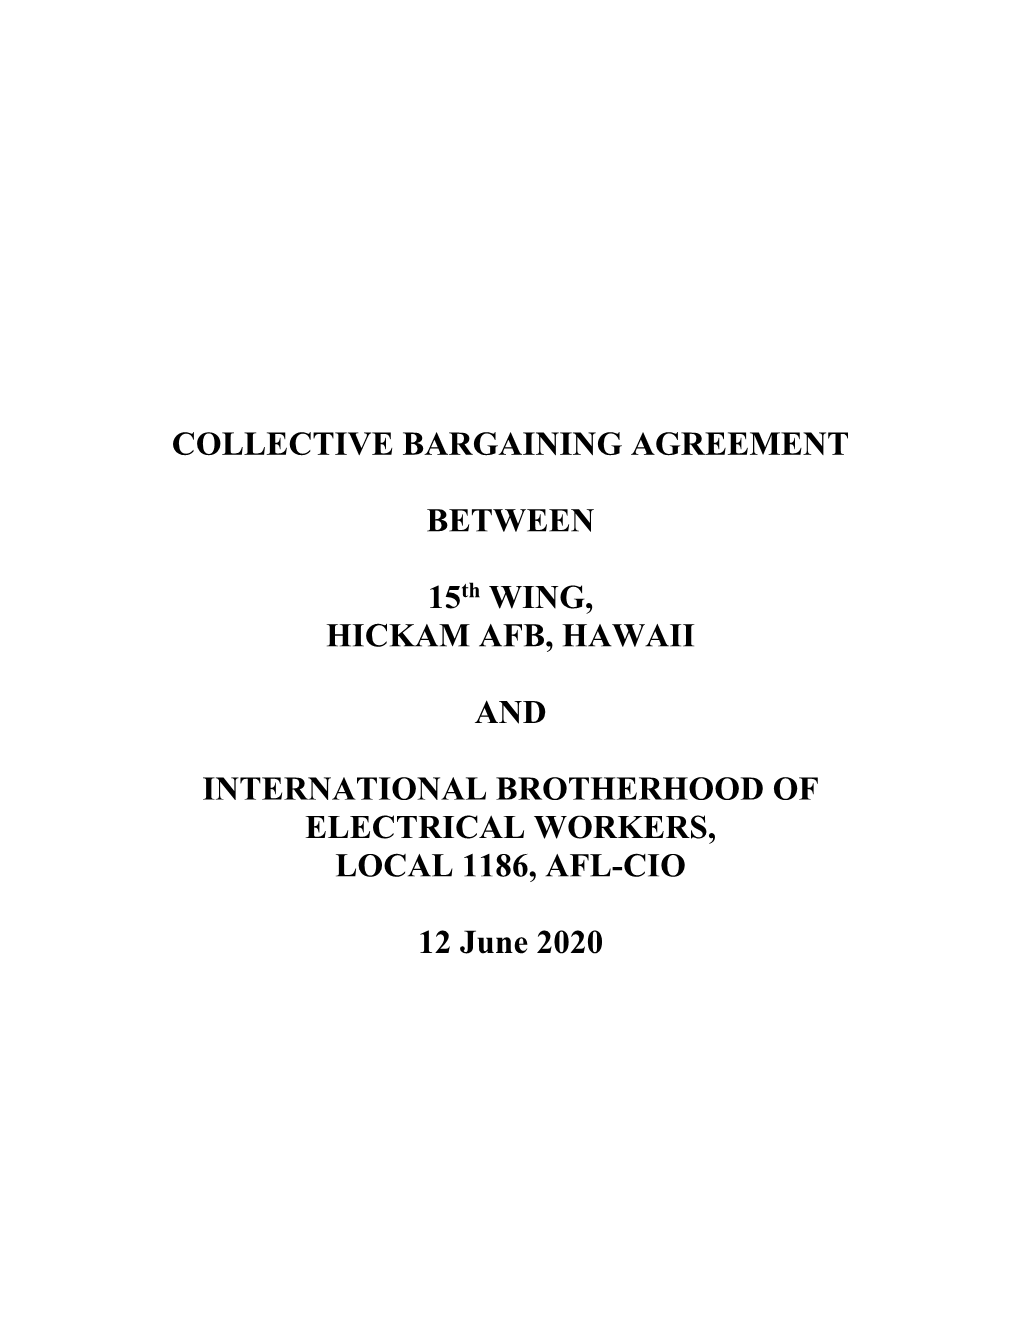 Collective Bargaining Agreement Between 15Th Wing, Hickam Afb, Hawaii and International Brotherhood of Electrical Workers, Local 1186, Afl-Cio